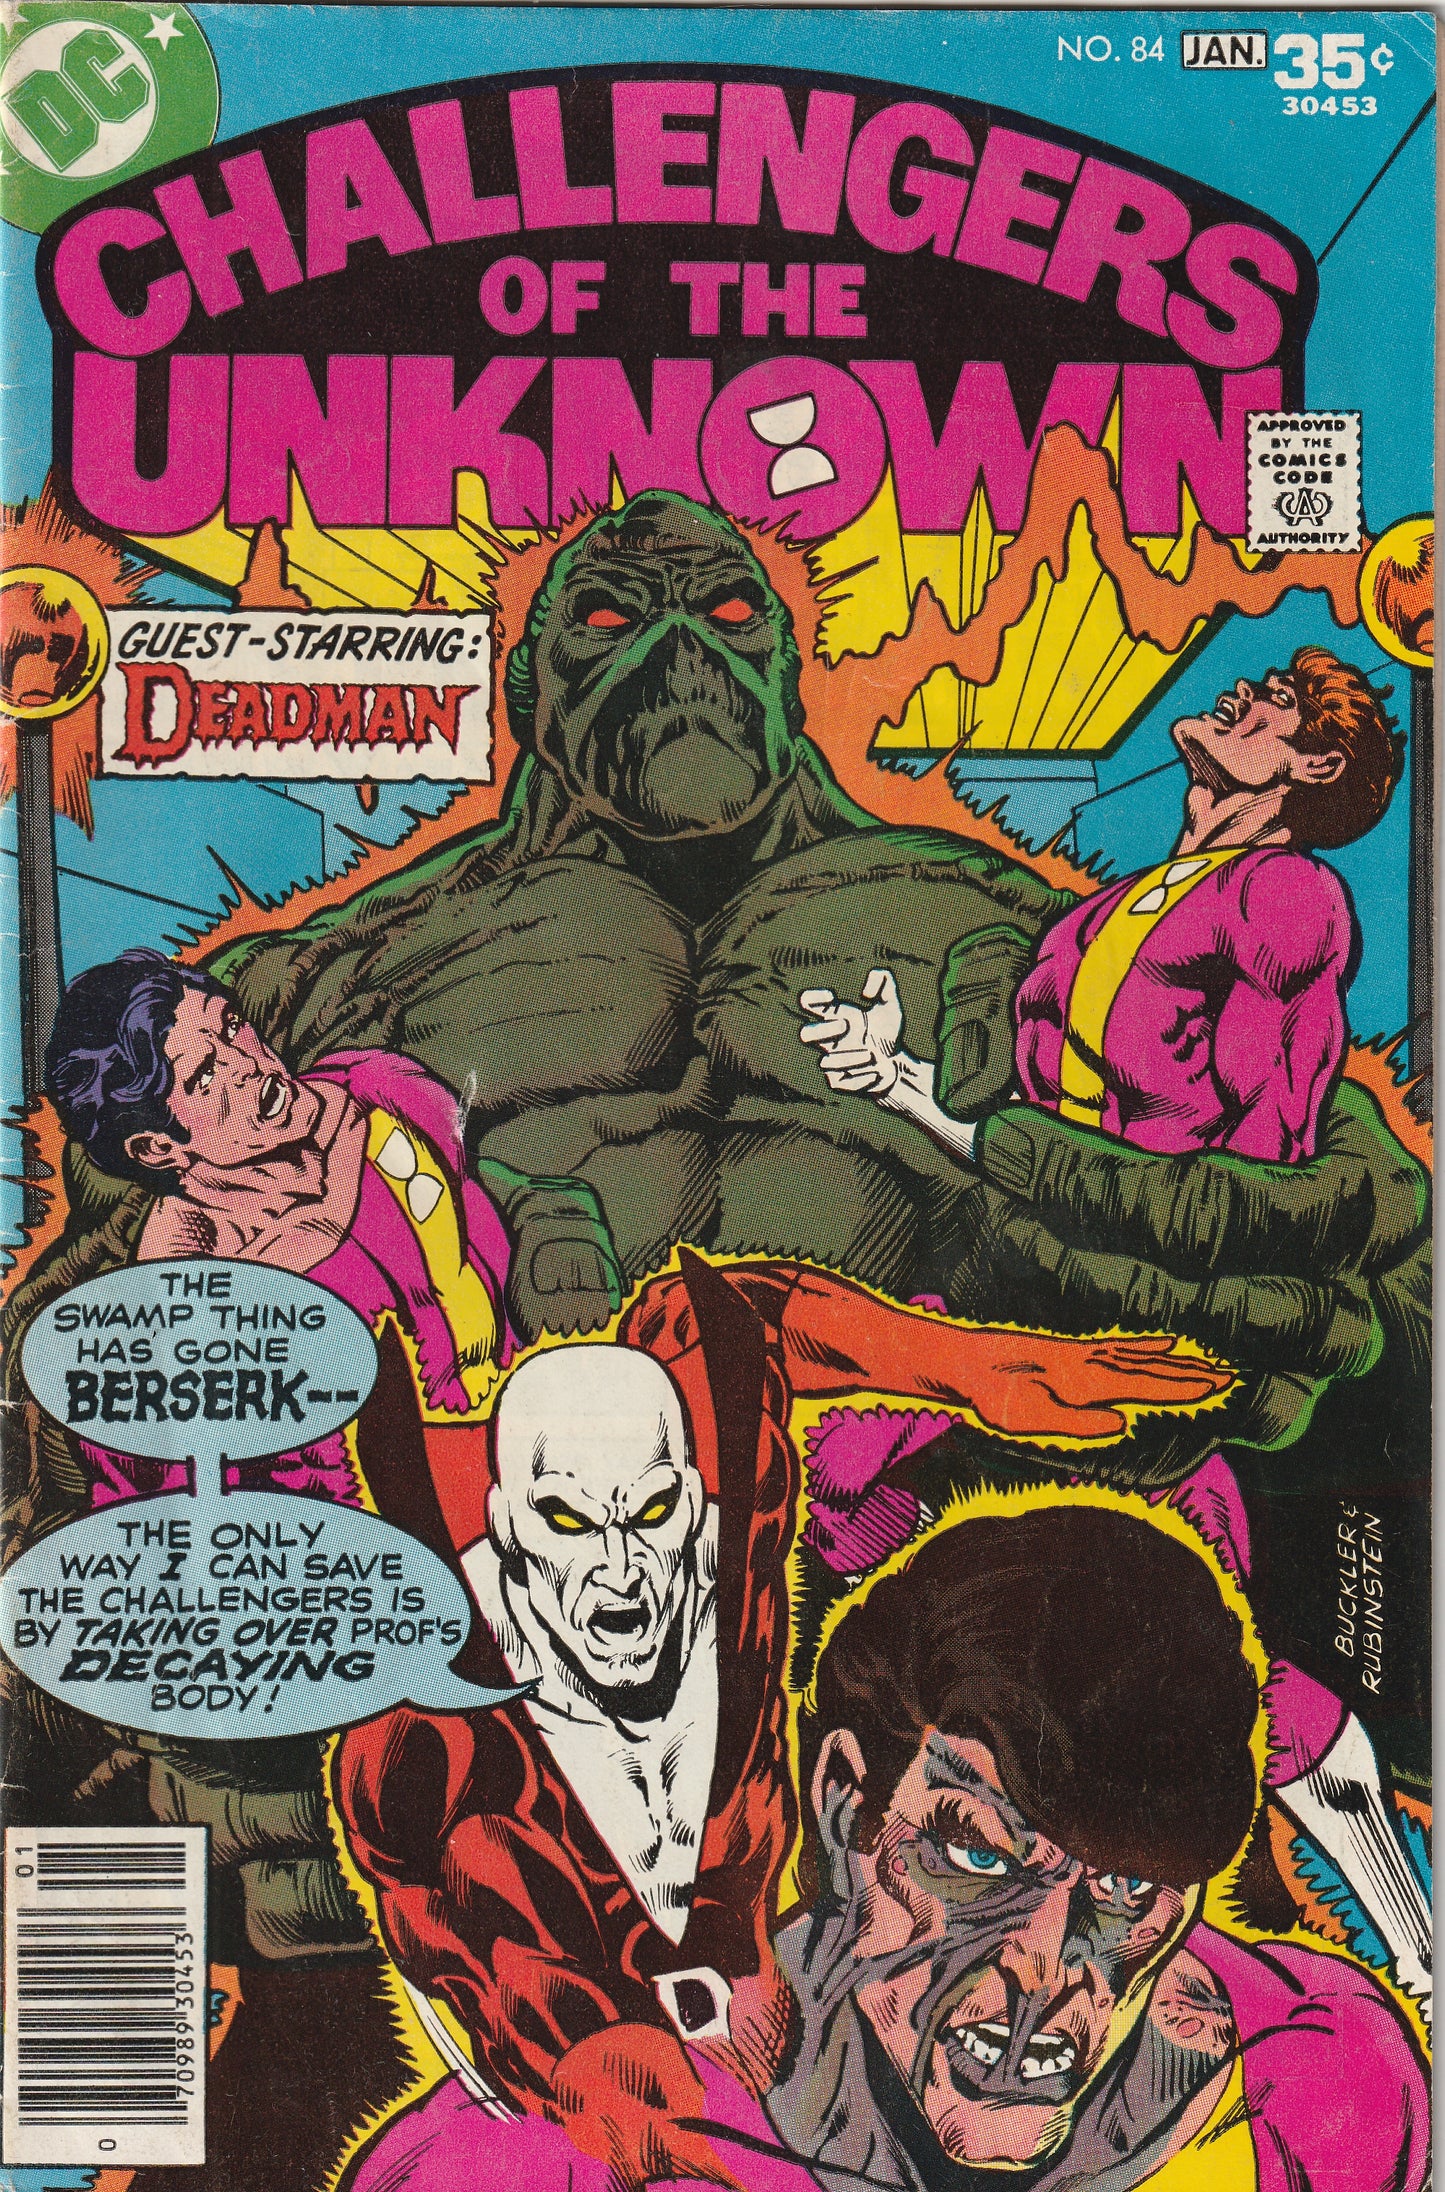 Challengers of the Unknown #84 (1977) - Deadman appearance